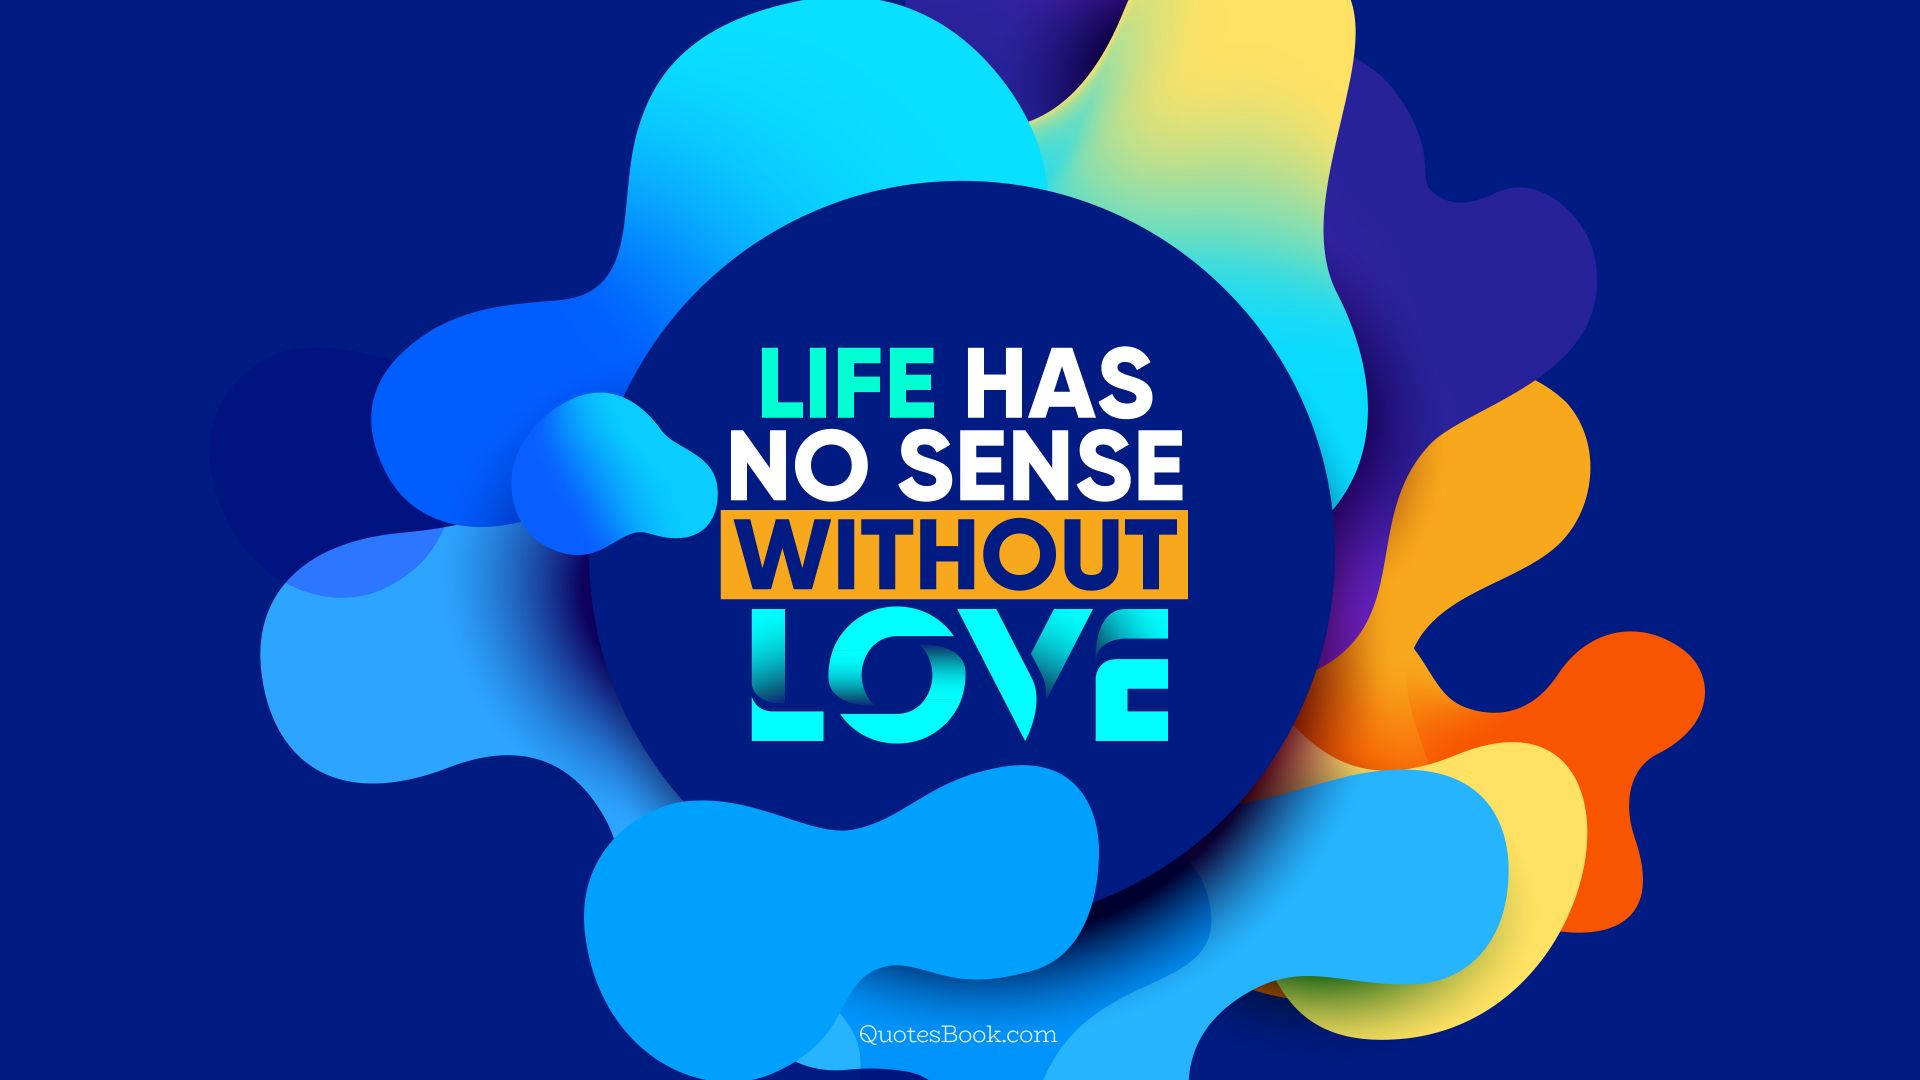 Life has no sense without love. - Quote by QuotesBook